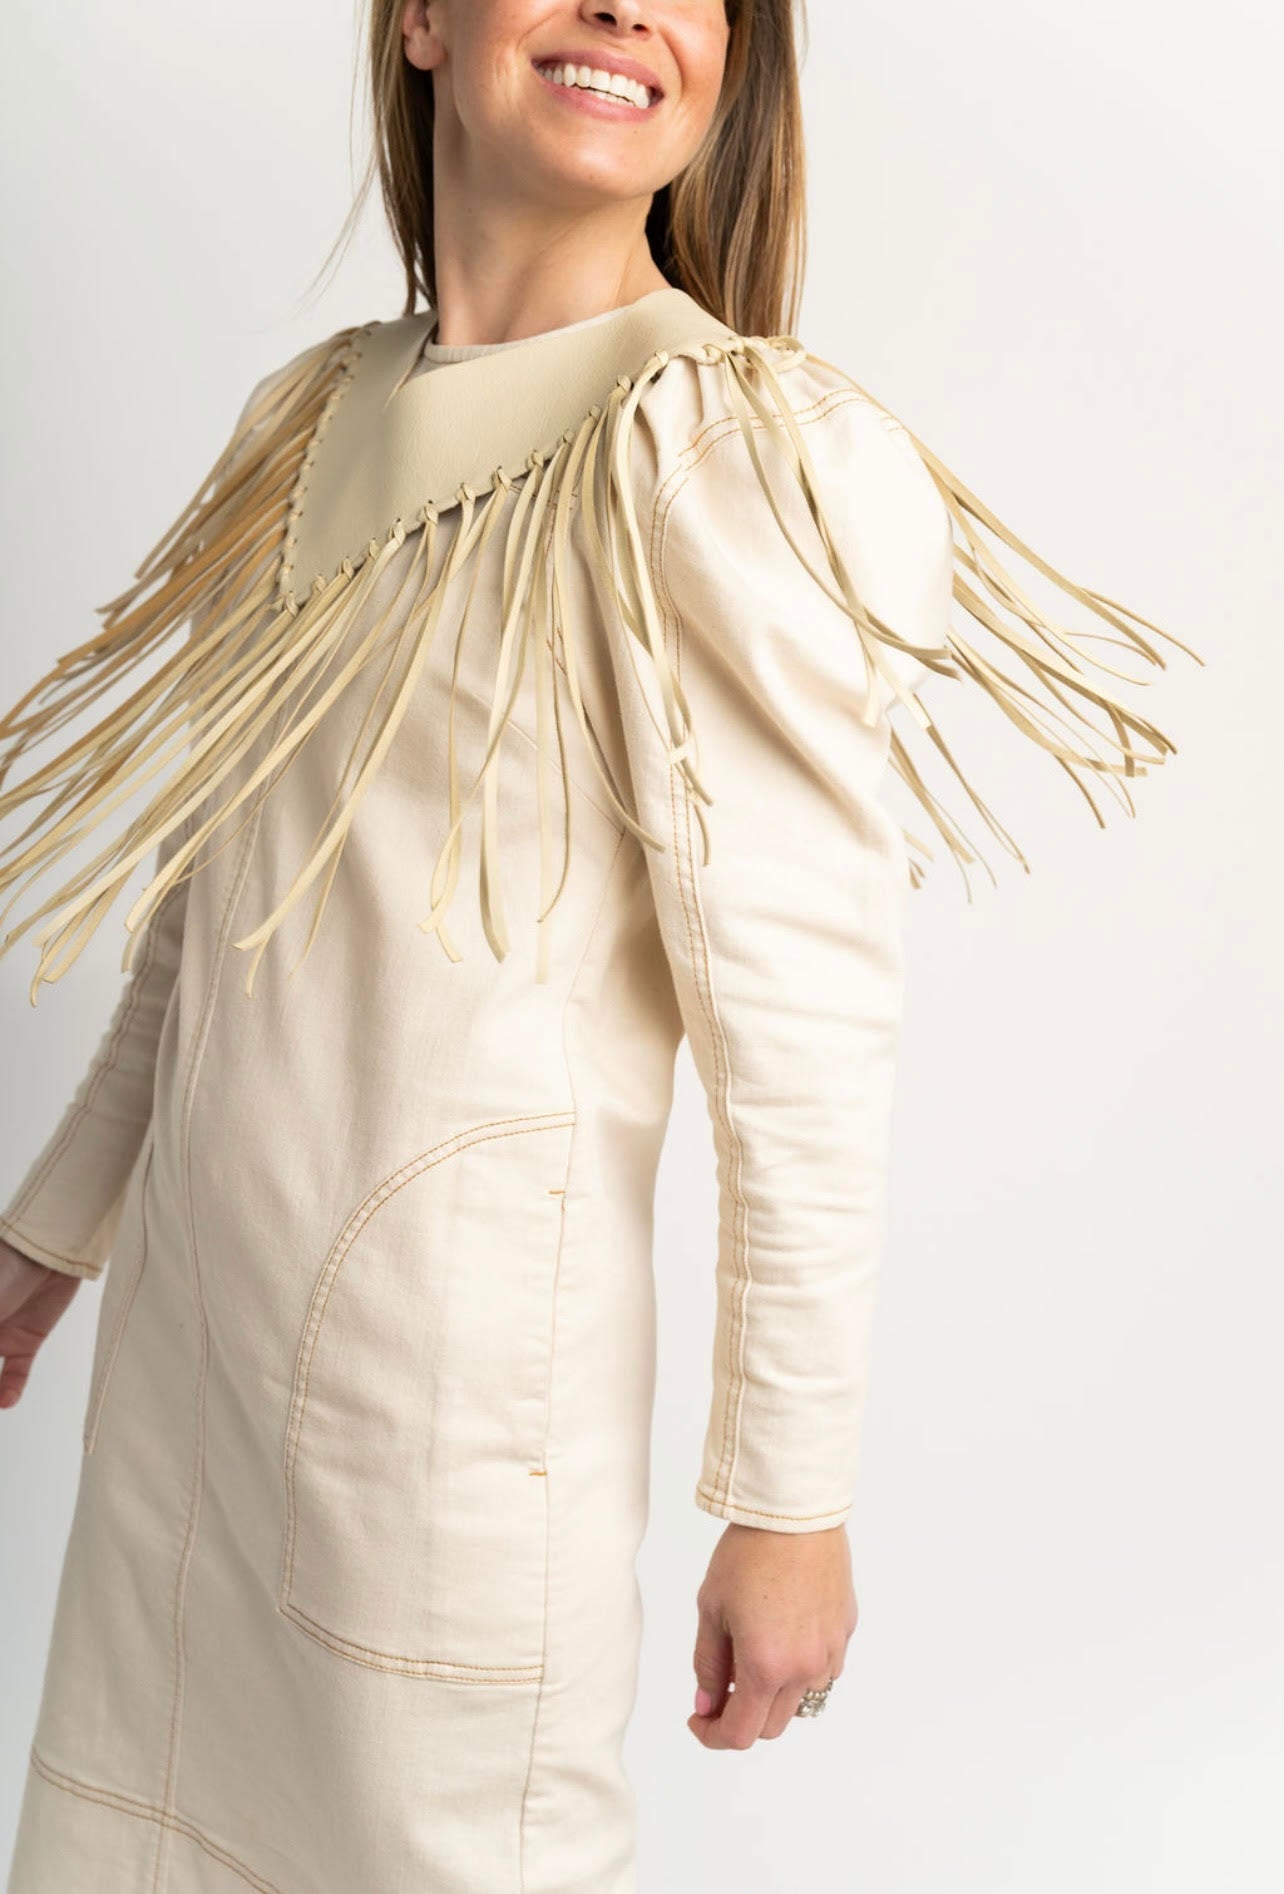 Collars - Fringe by McNeely Purcell